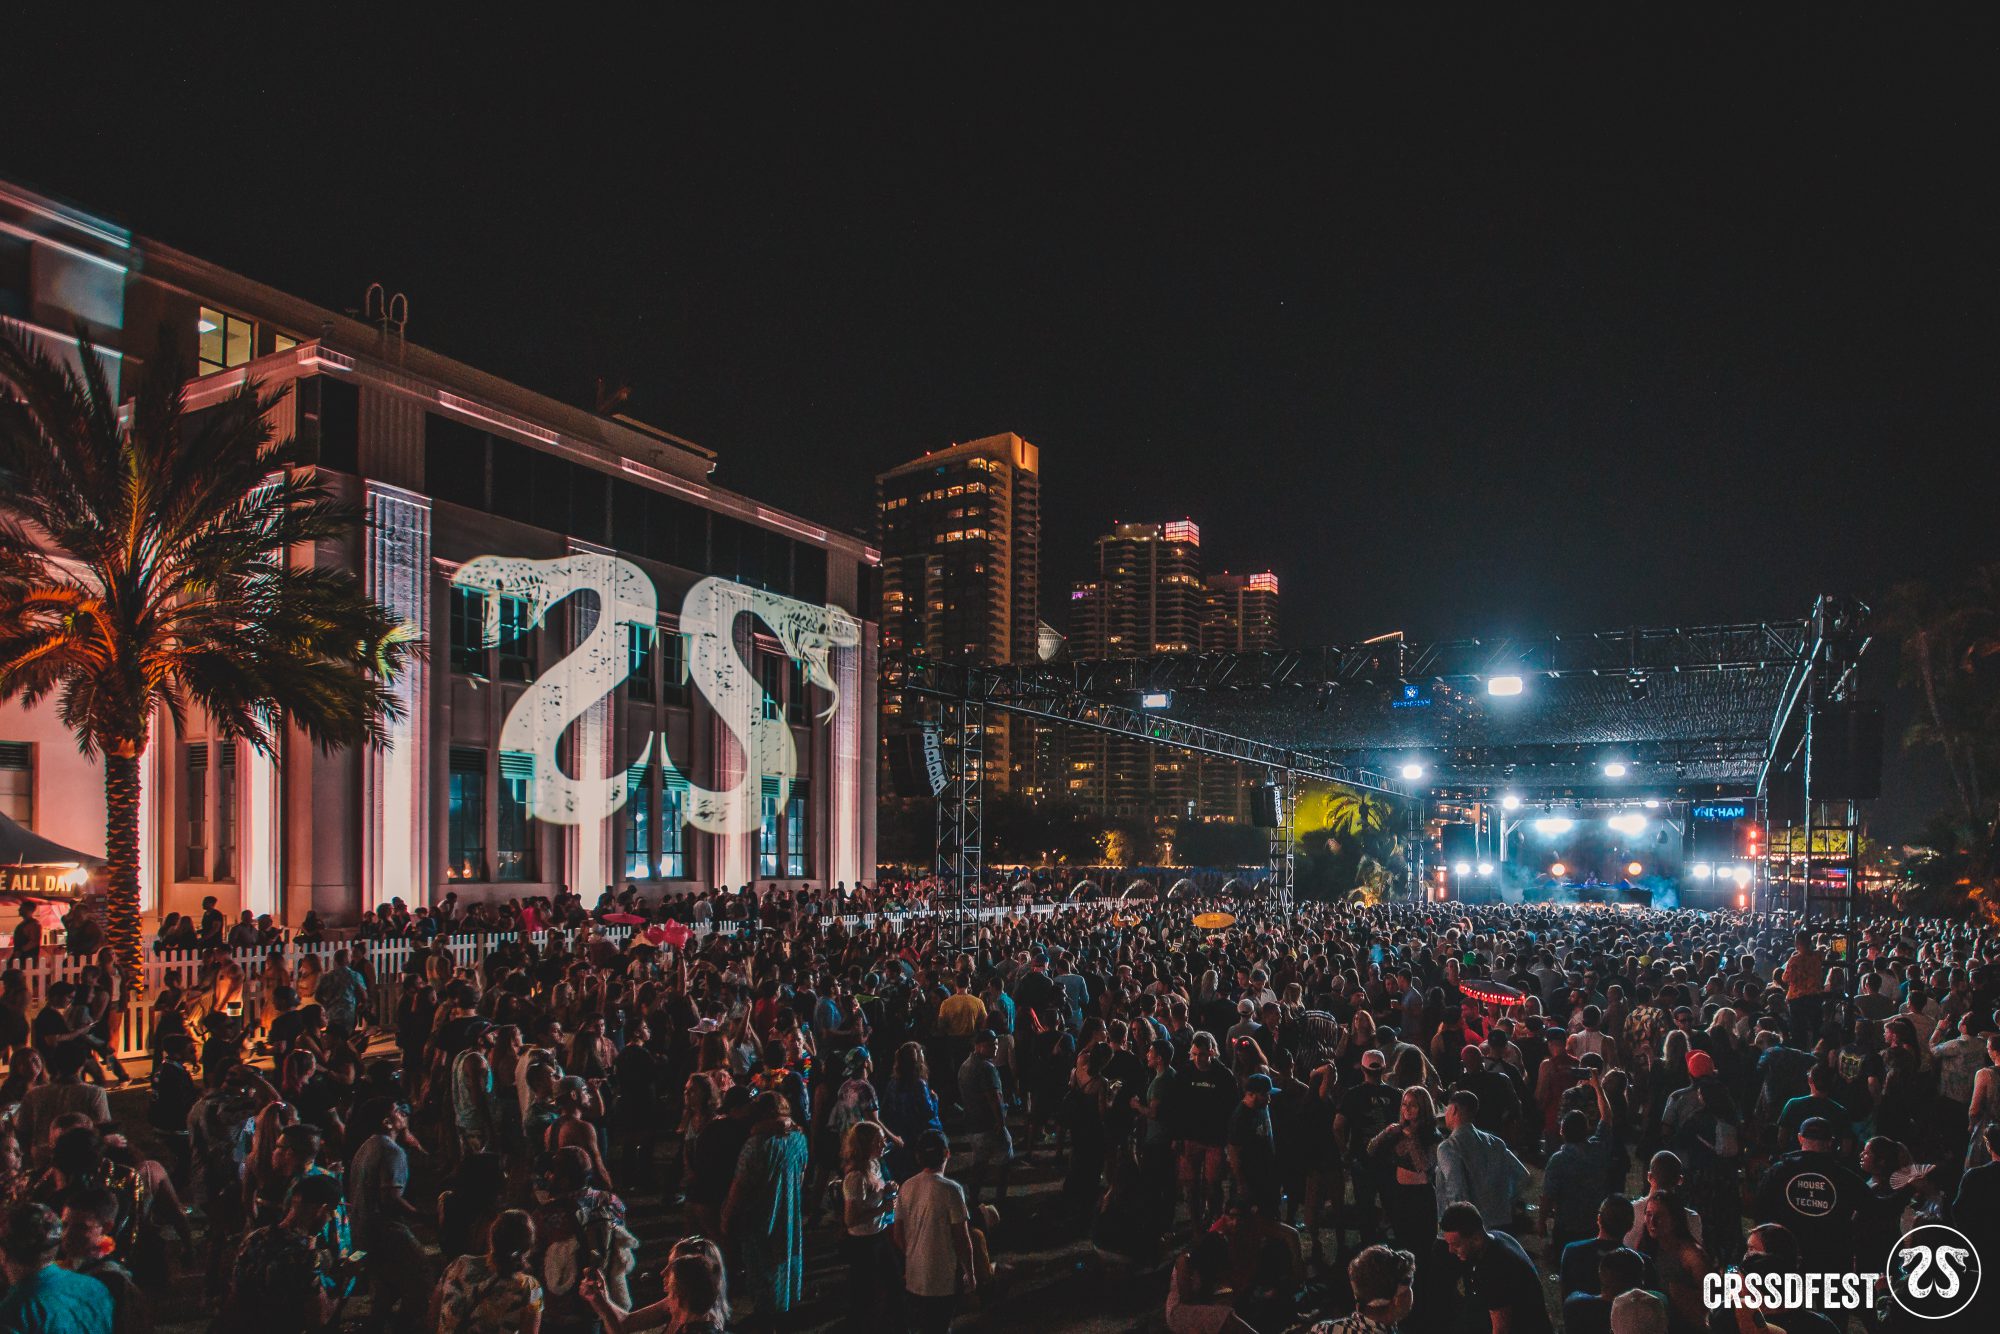 CRSSD Festival Fall 2018 - Snakes at Night